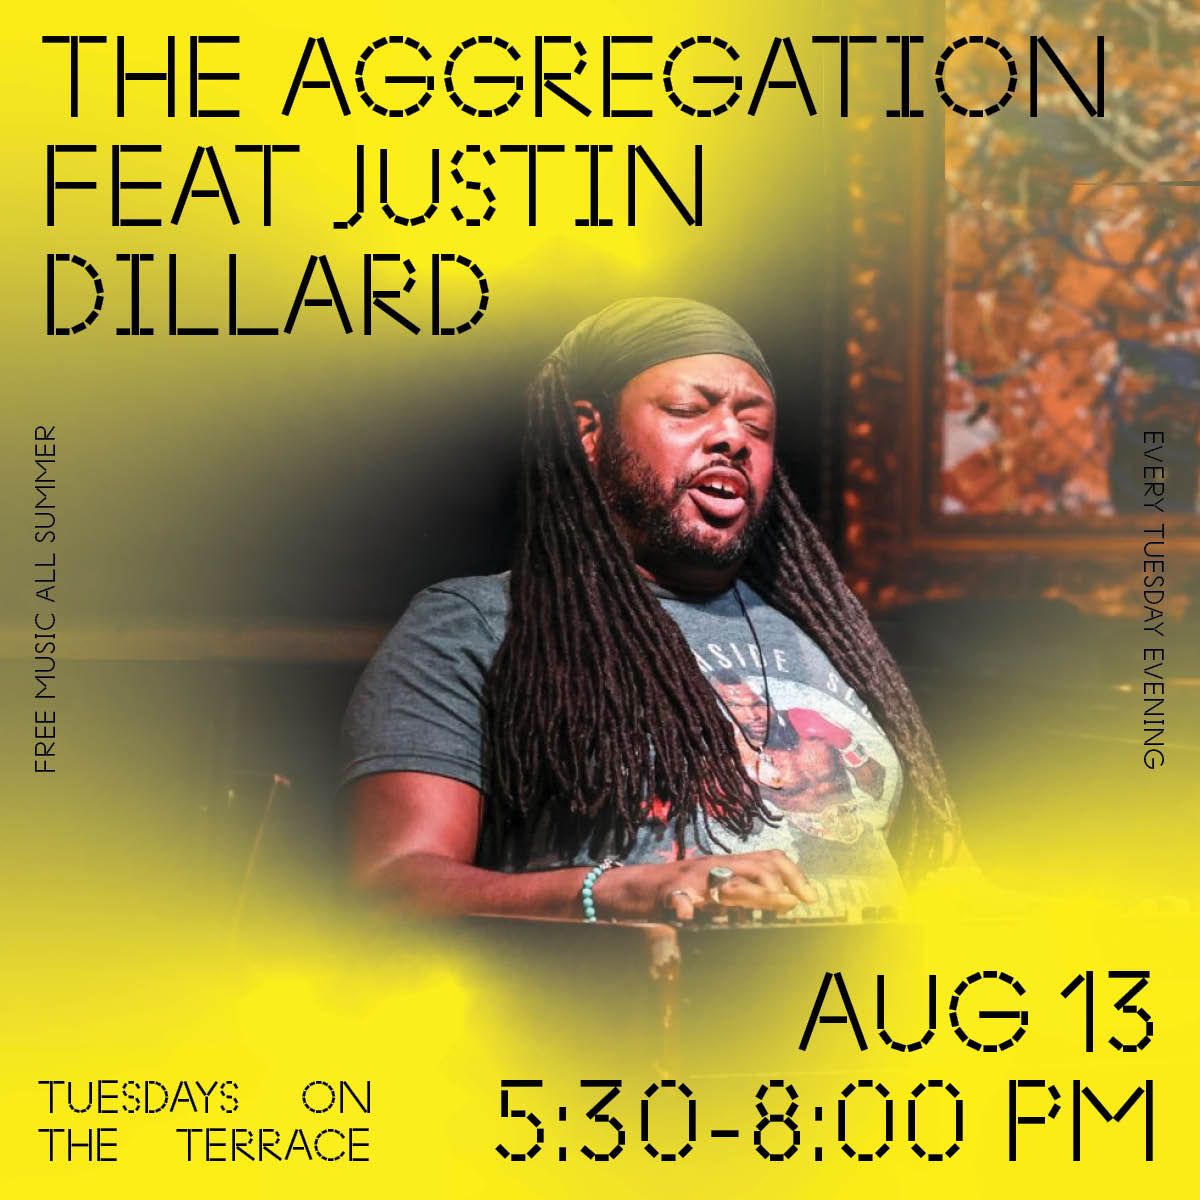 Tuesdays on the Terrace | The Aggregation featuring Justin Dillard